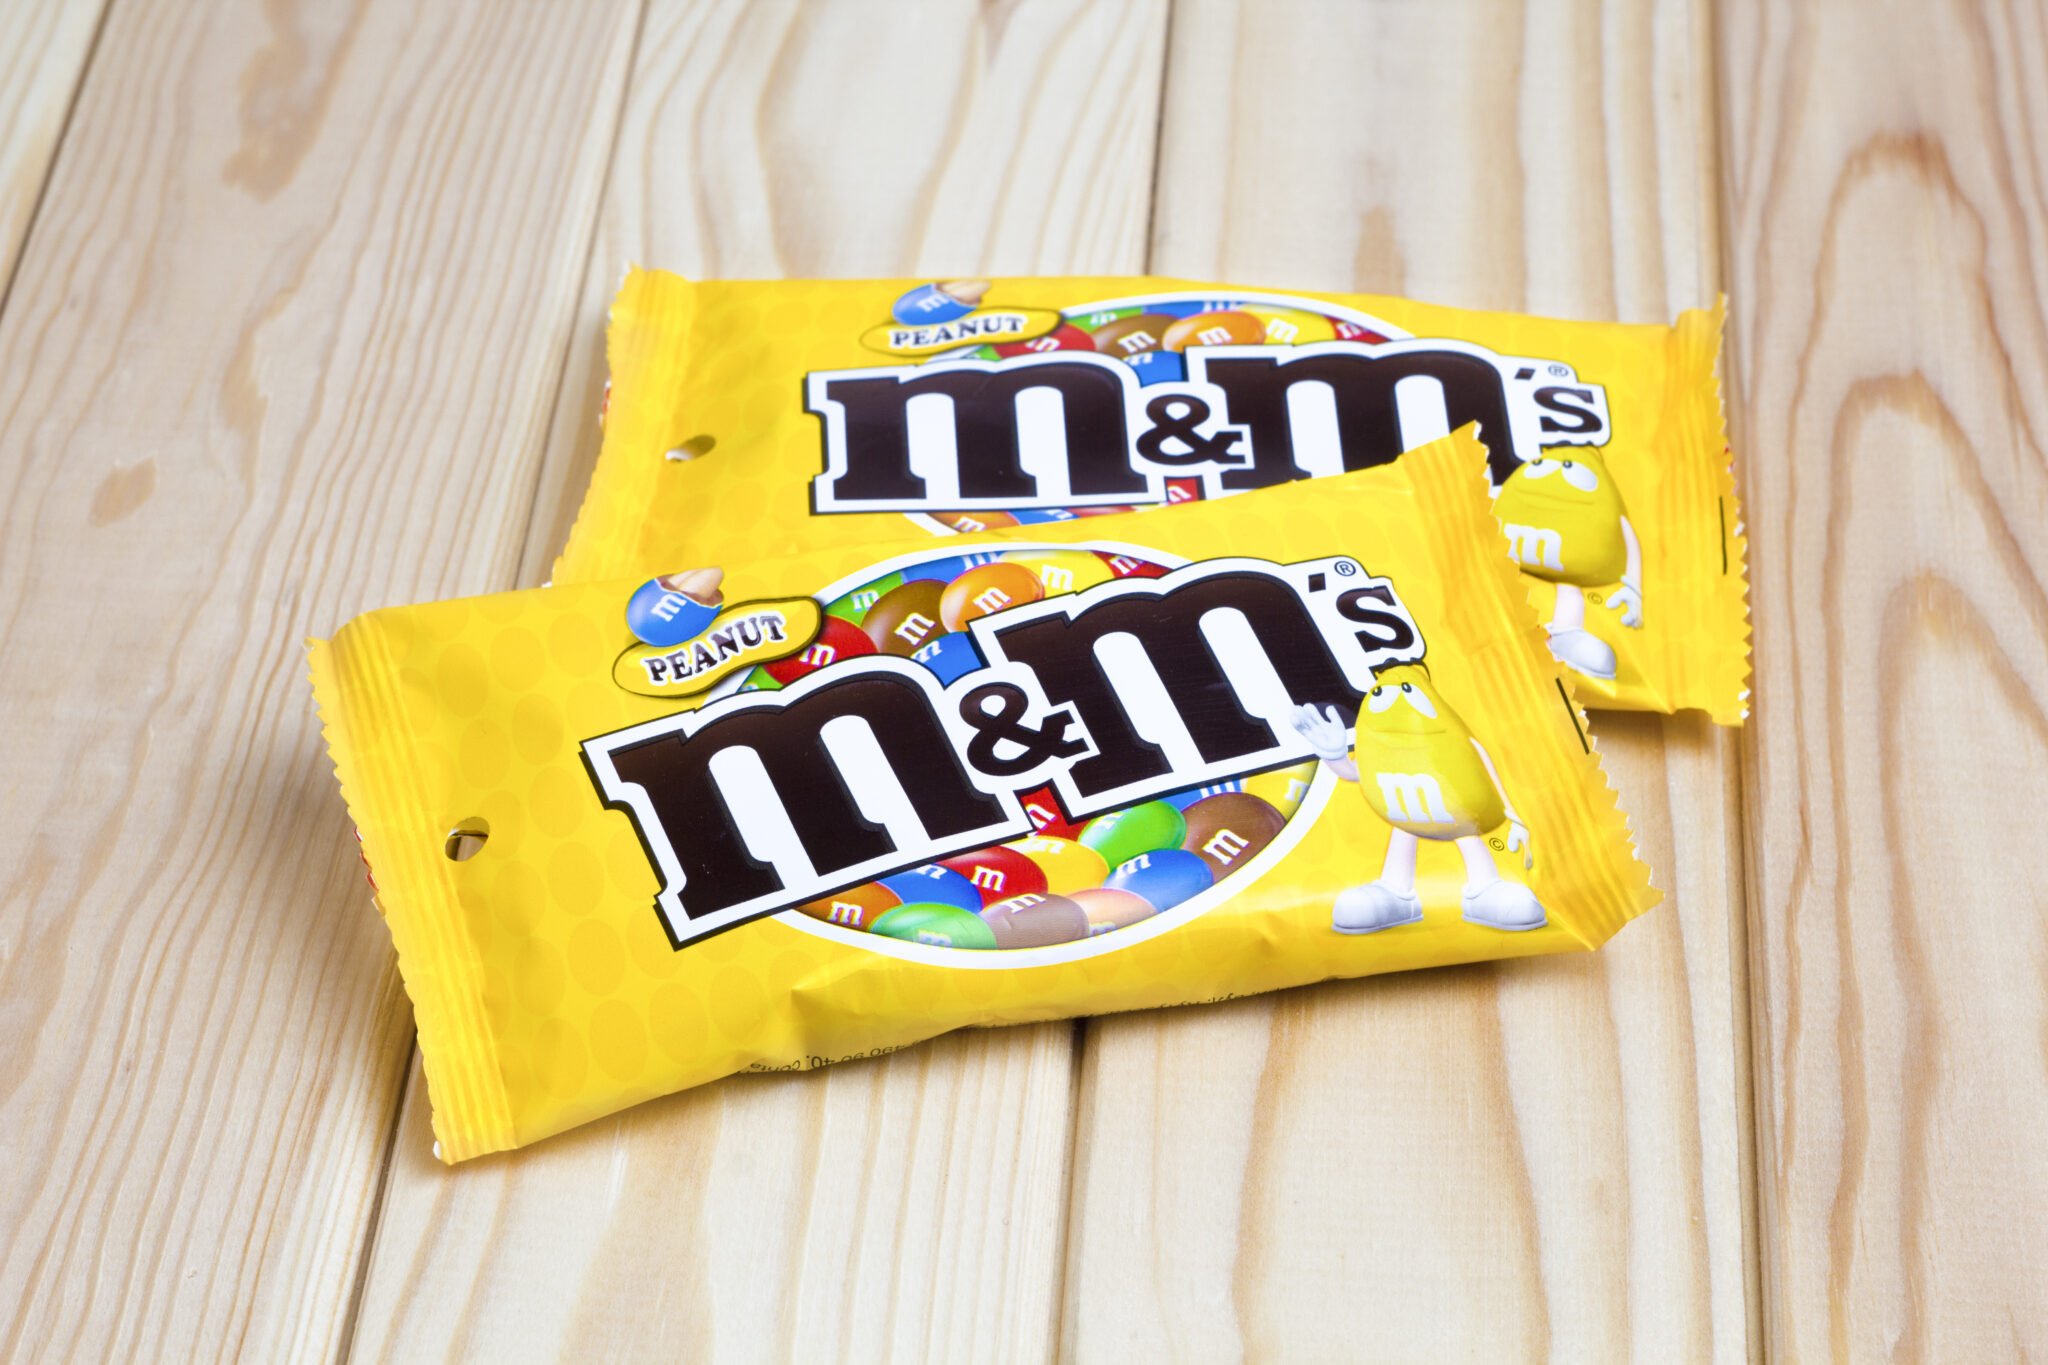 <p>Combine two delicious snacks in one gas station purchase with Peanut M&M’s. A chocolatey layer encapsulates a solid peanut for a perfect combination of the greatest candy merge of all time.</p>